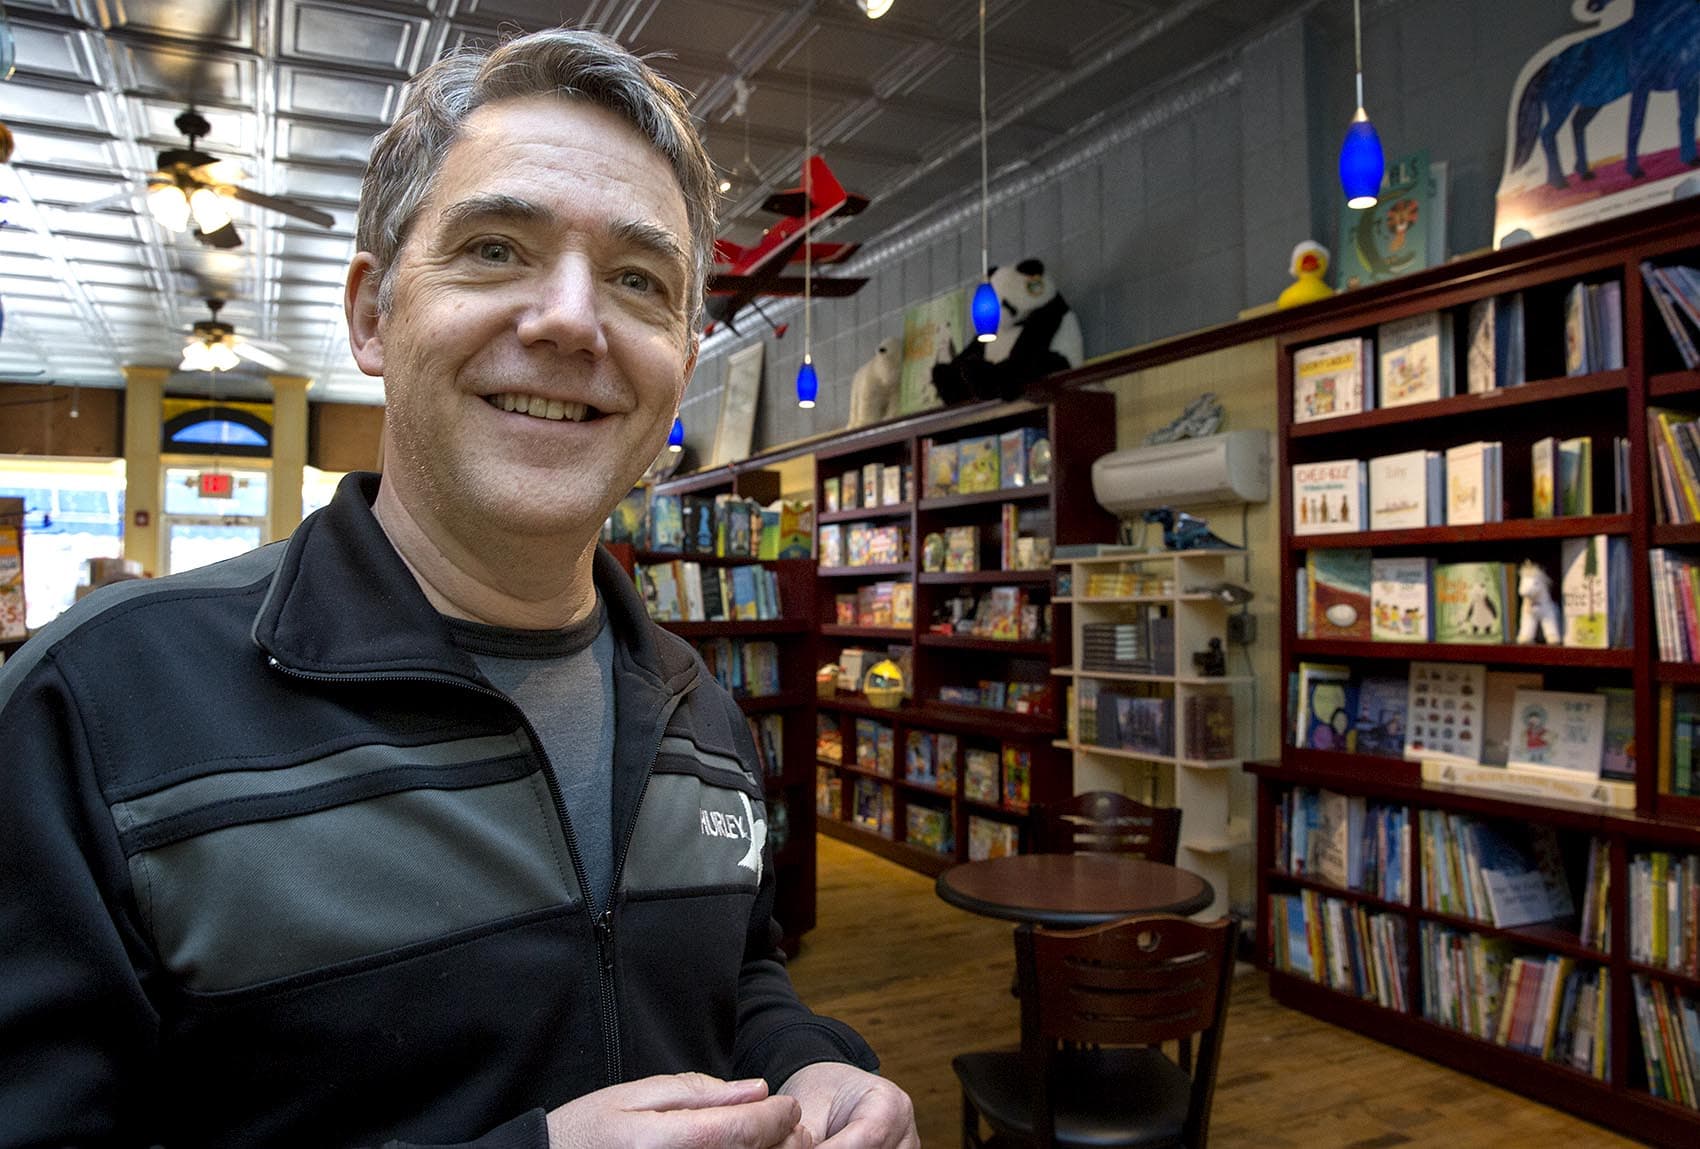 Peter H. Reynolds, owner of The Blue Bunny Bookstore in Dedham stands surrounded by books on the day Amazon also opened a bookstore in the town. He said independent bookstores are an endangered species and need to be supported so they can stick around. (Robin Lubbock/WBUR)